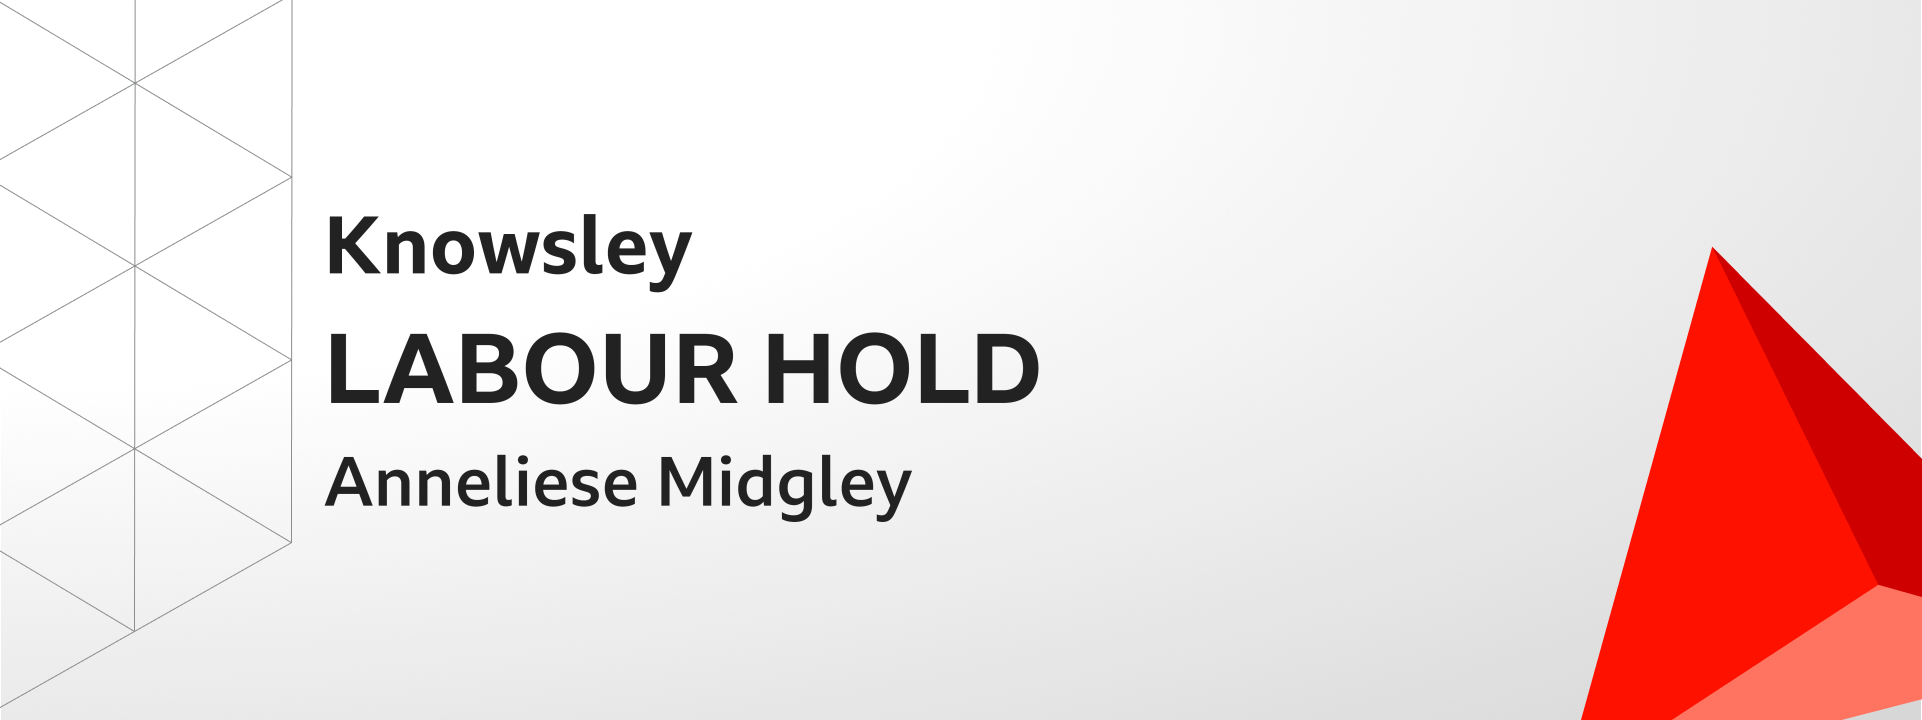 Graphic showing Labour holds Knowsley. The winning candidate was Anneliese Midgley.